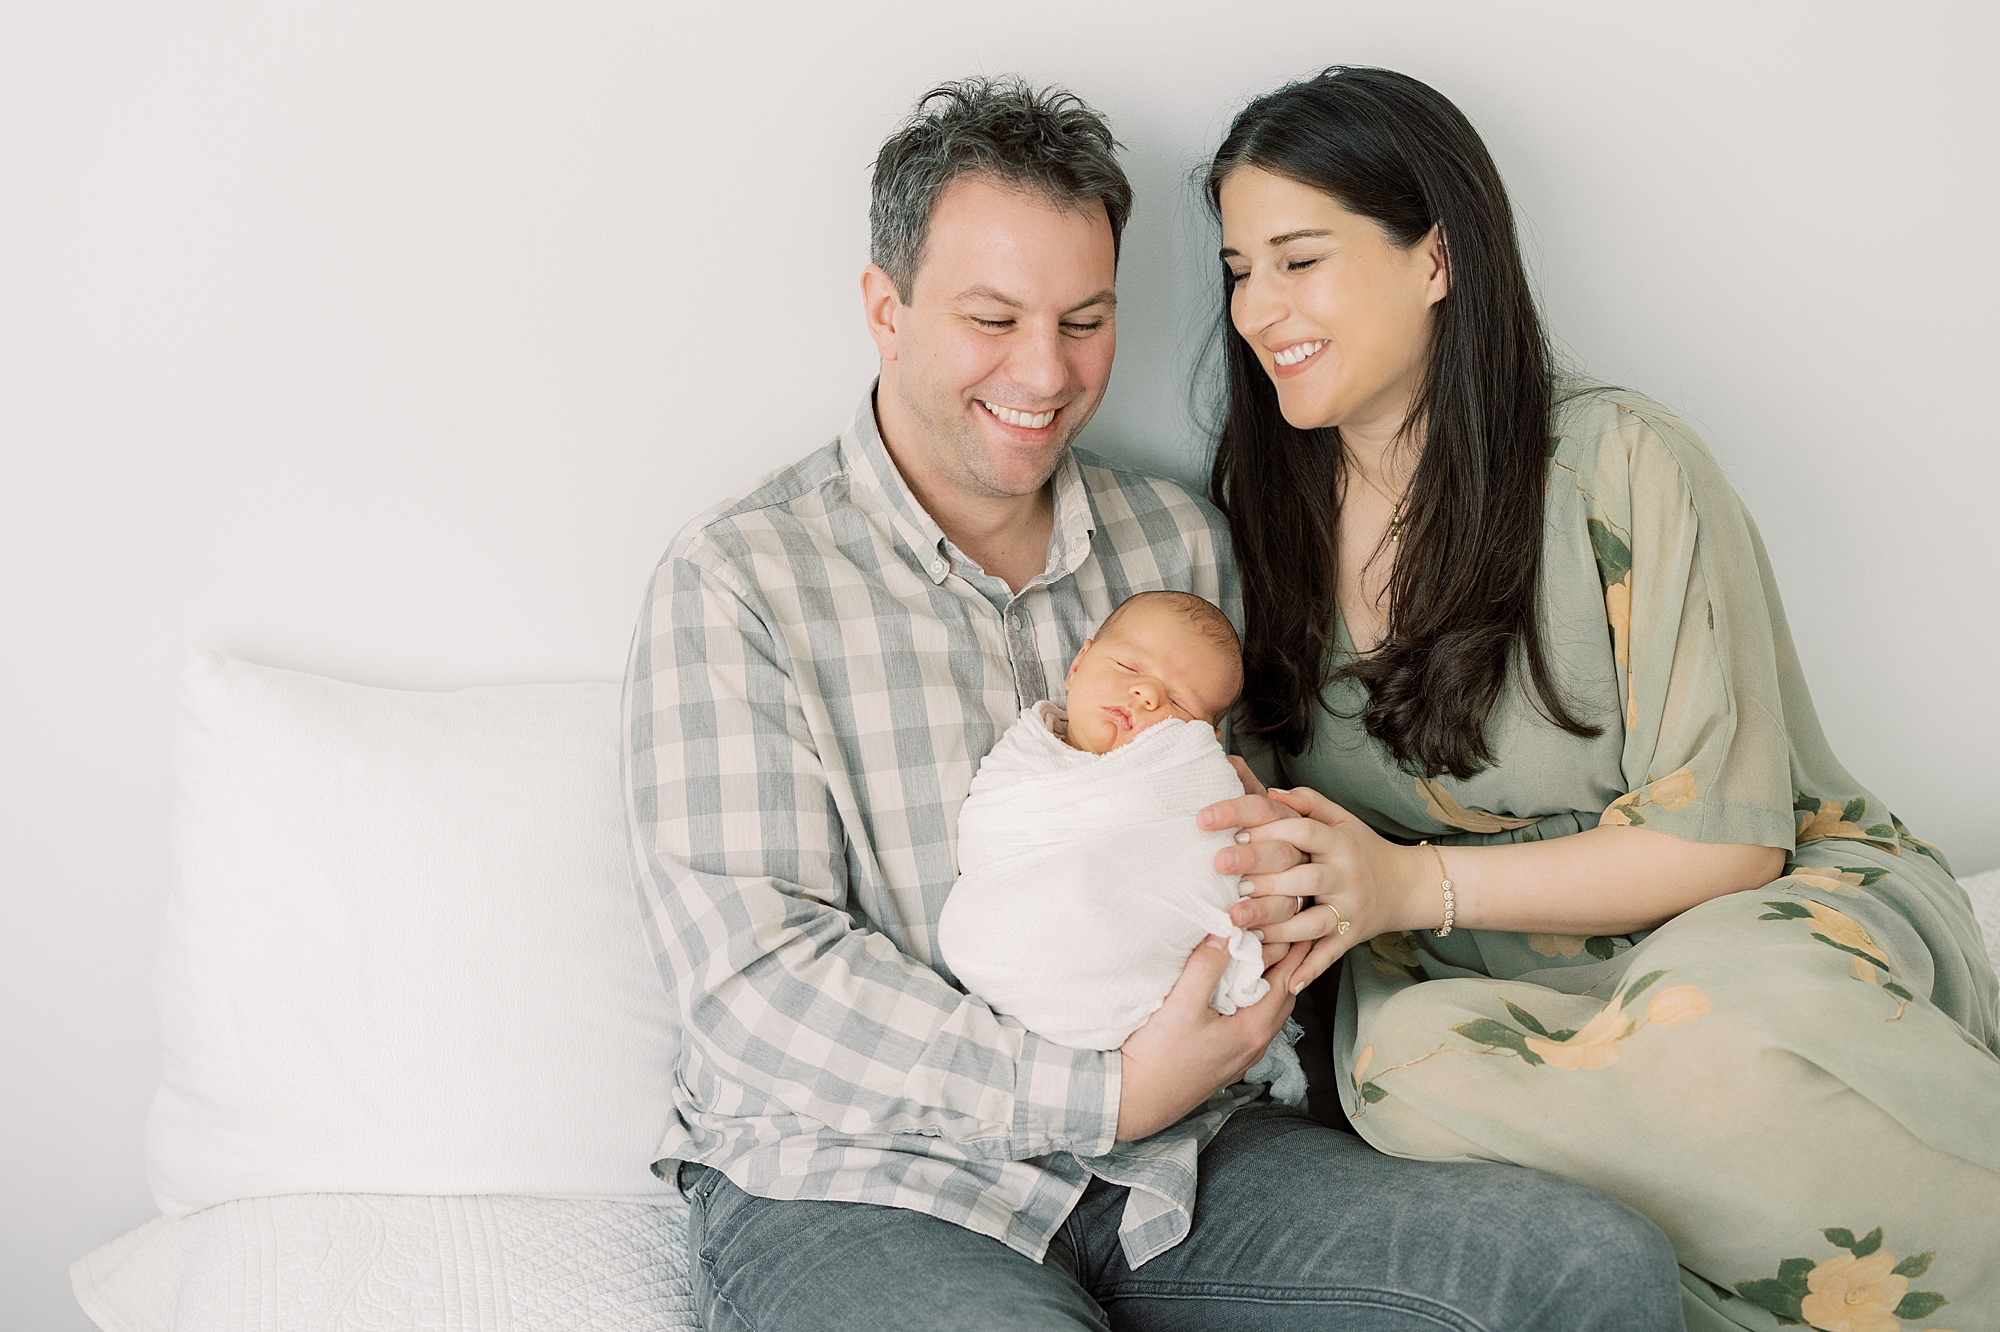 parents laugh holding new son during photos on bed